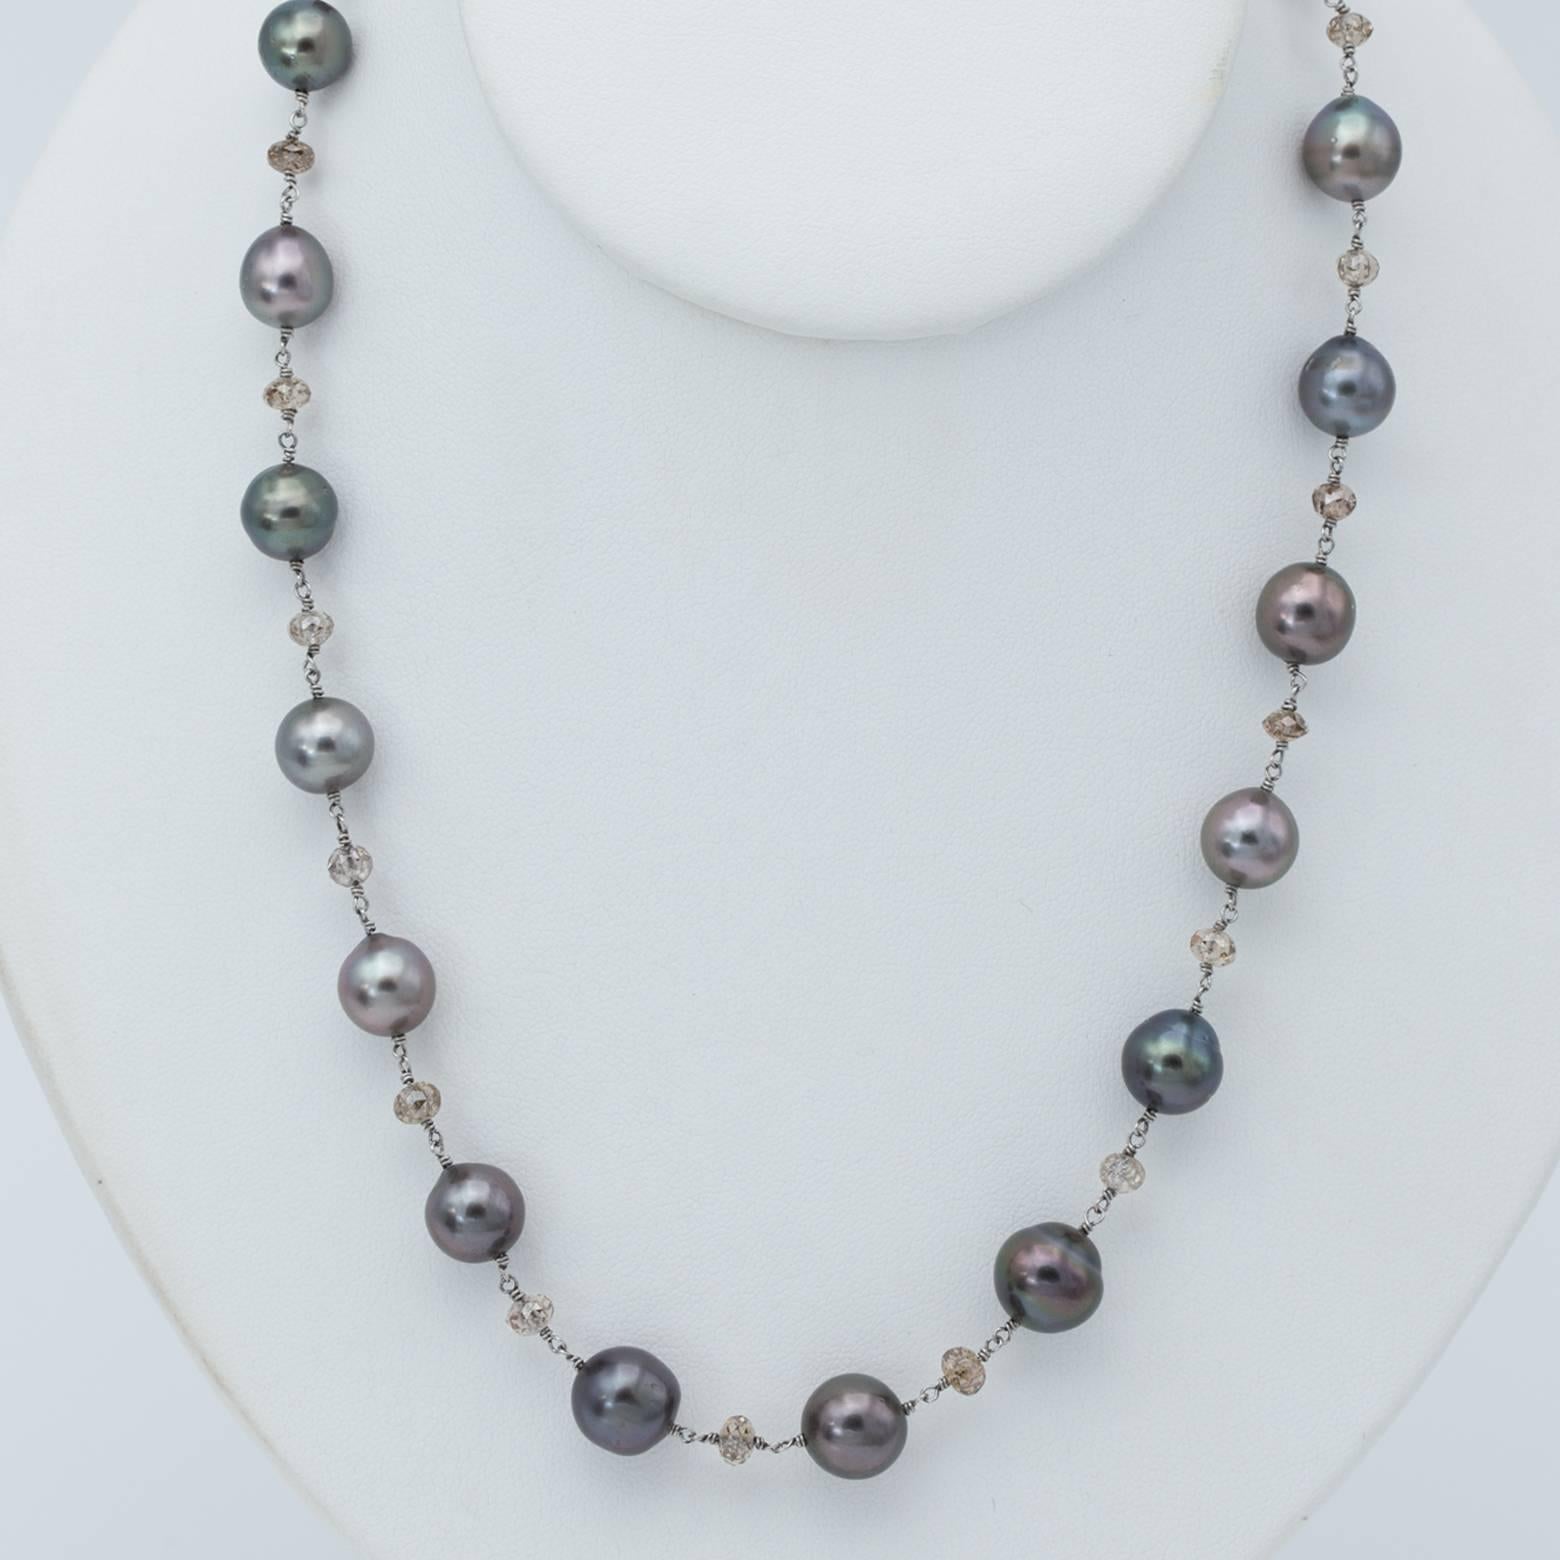 19 black pearls and 20 champagne faceted diamond beads create this gorgeous elaborate necklace. The total weight of the diamonds is ~18.36 carats and the pearls are an average of 10mm. Set in 18K white gold with a white gold clasp adorned with white